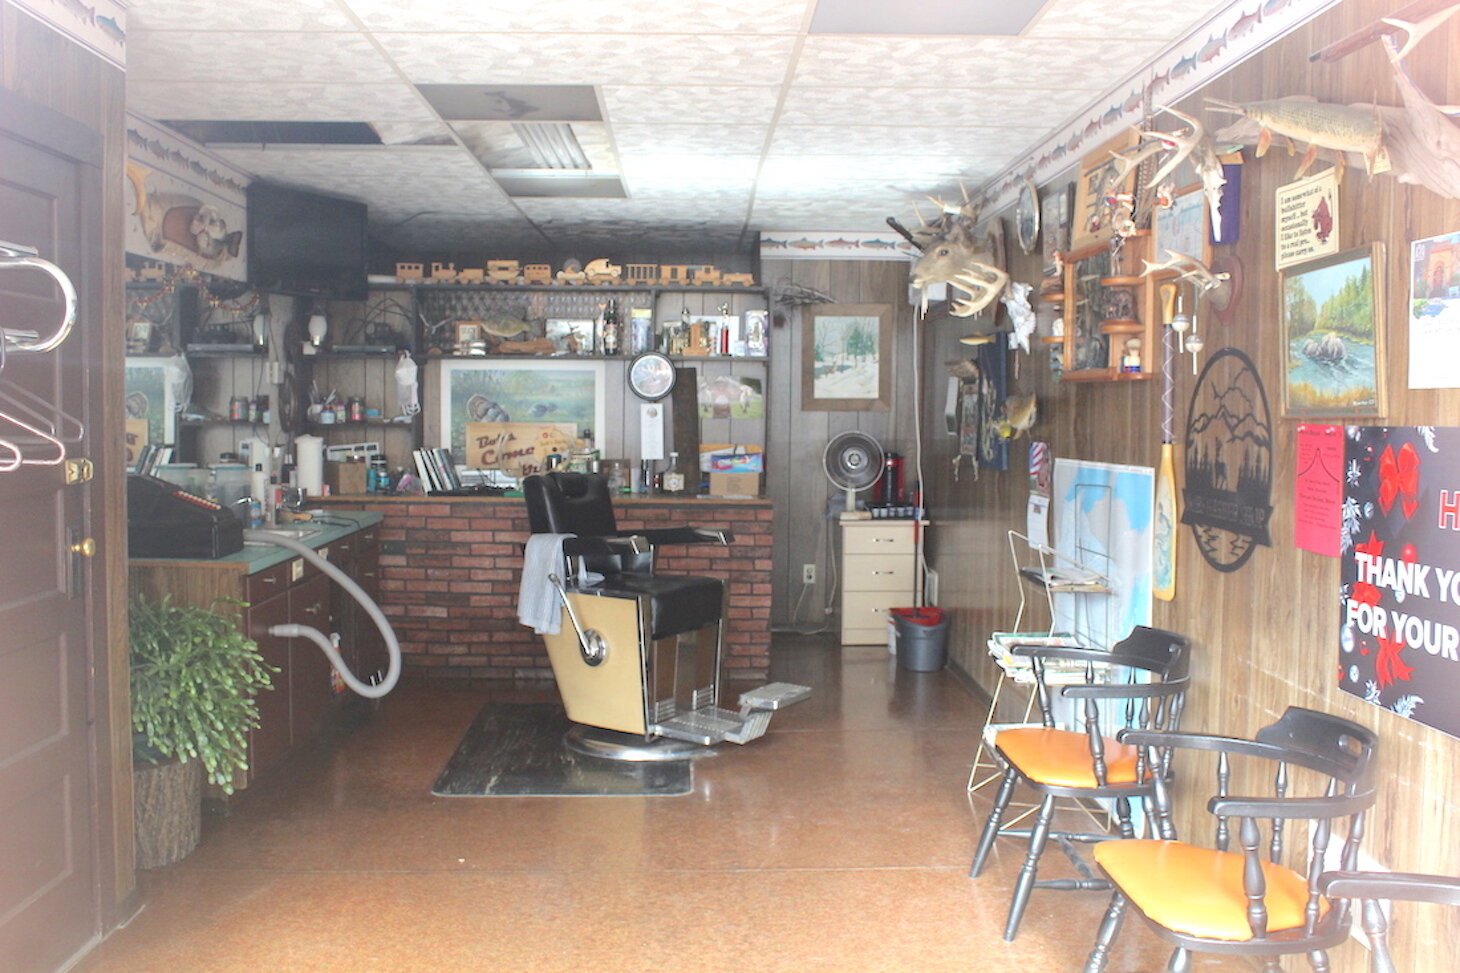 Sharing a building for years with Ragatz insurance, Bob's Barber Shop at 213 North Broadway was popular with many.